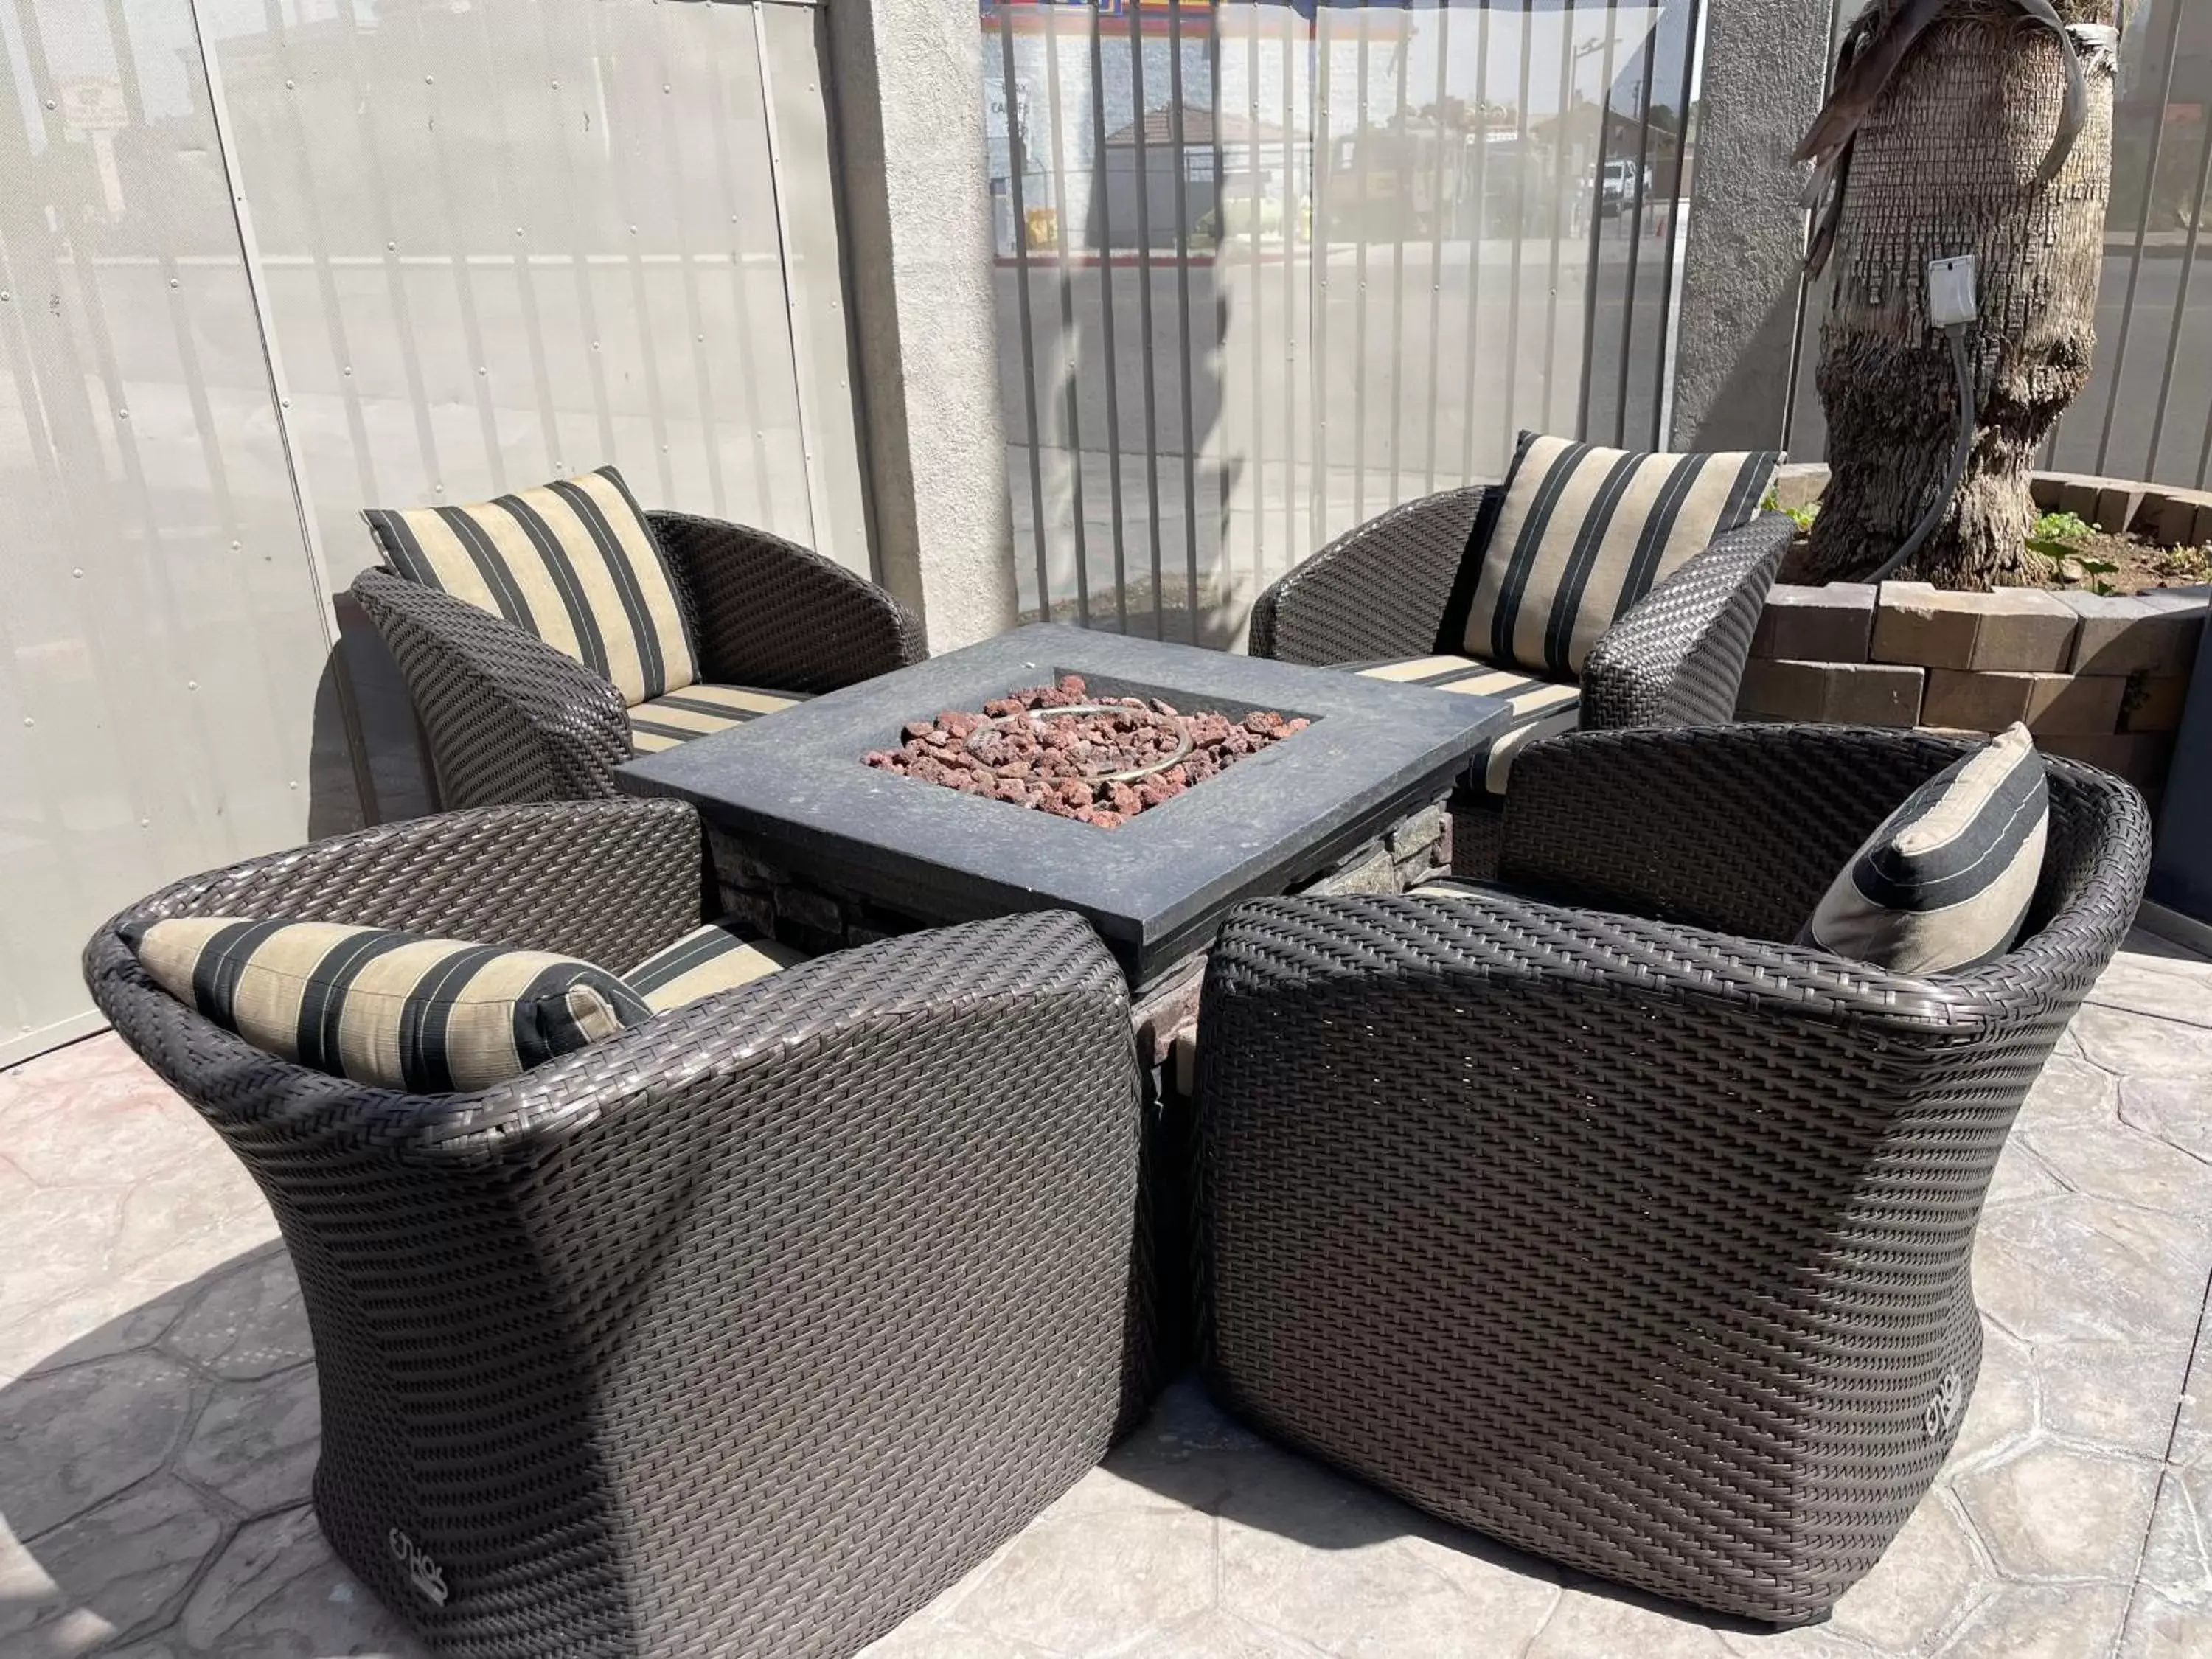 Patio, Seating Area in La Quinta Inn & Suites by Wyndham Hesperia Victorville